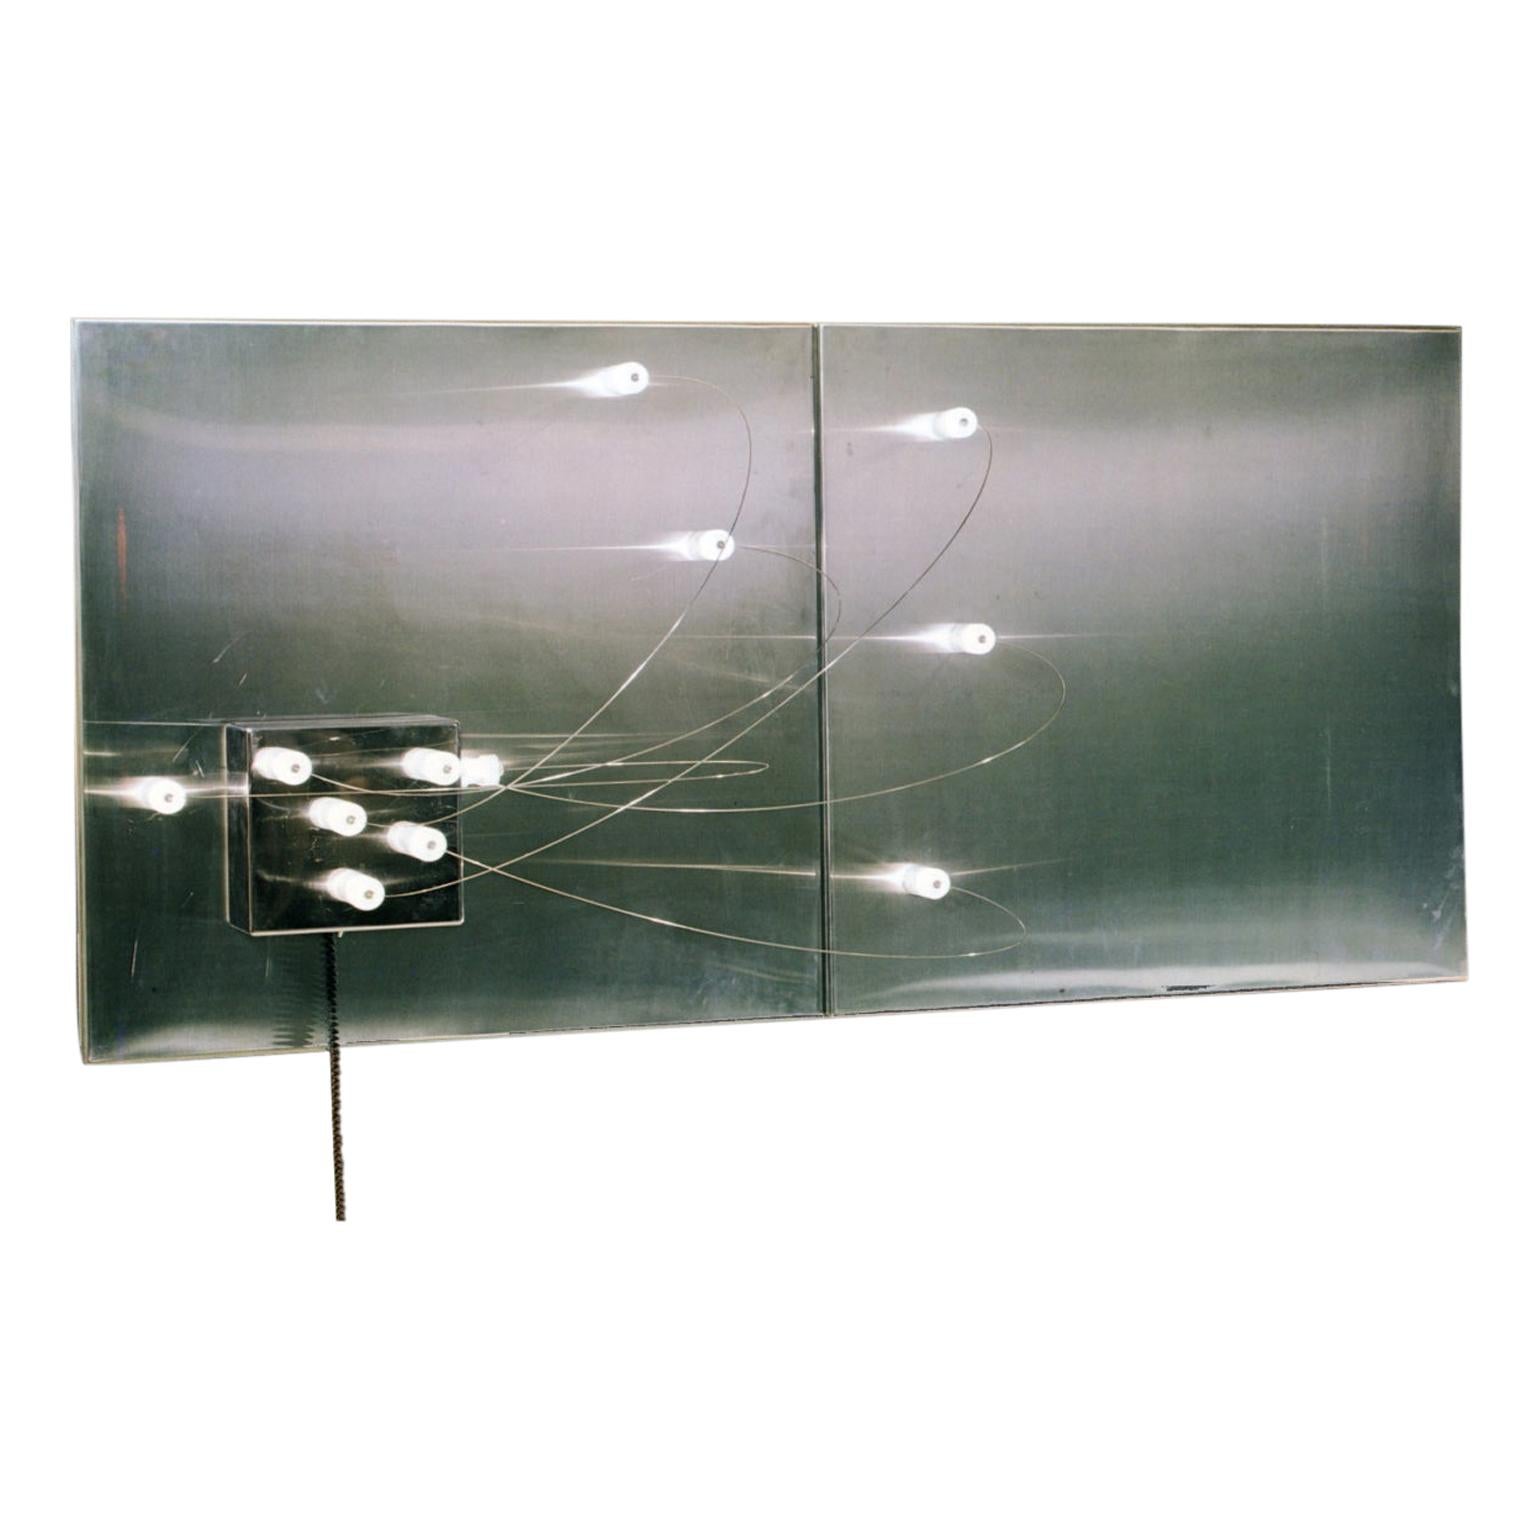 1972 A.R.D.I.T.I. Wall Lamp Chromed Steel and Movable Lights for Sormani, Italy